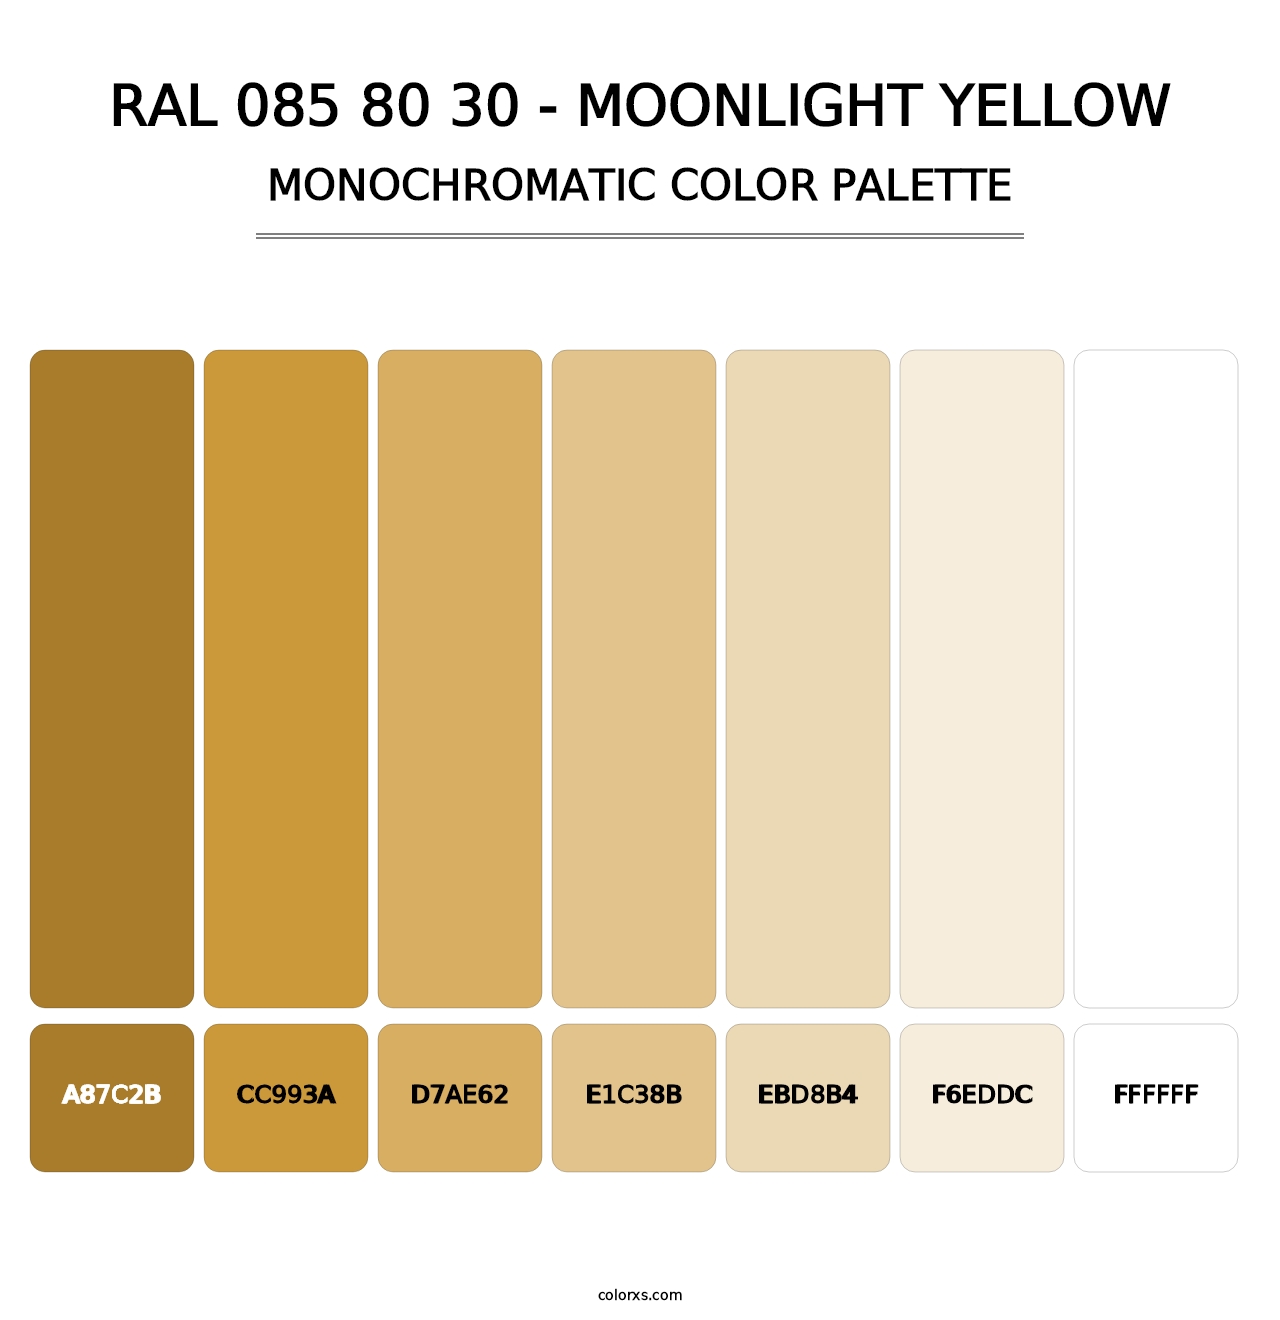 RAL 085 80 30 - Moonlight Yellow - Monochromatic Color Palette